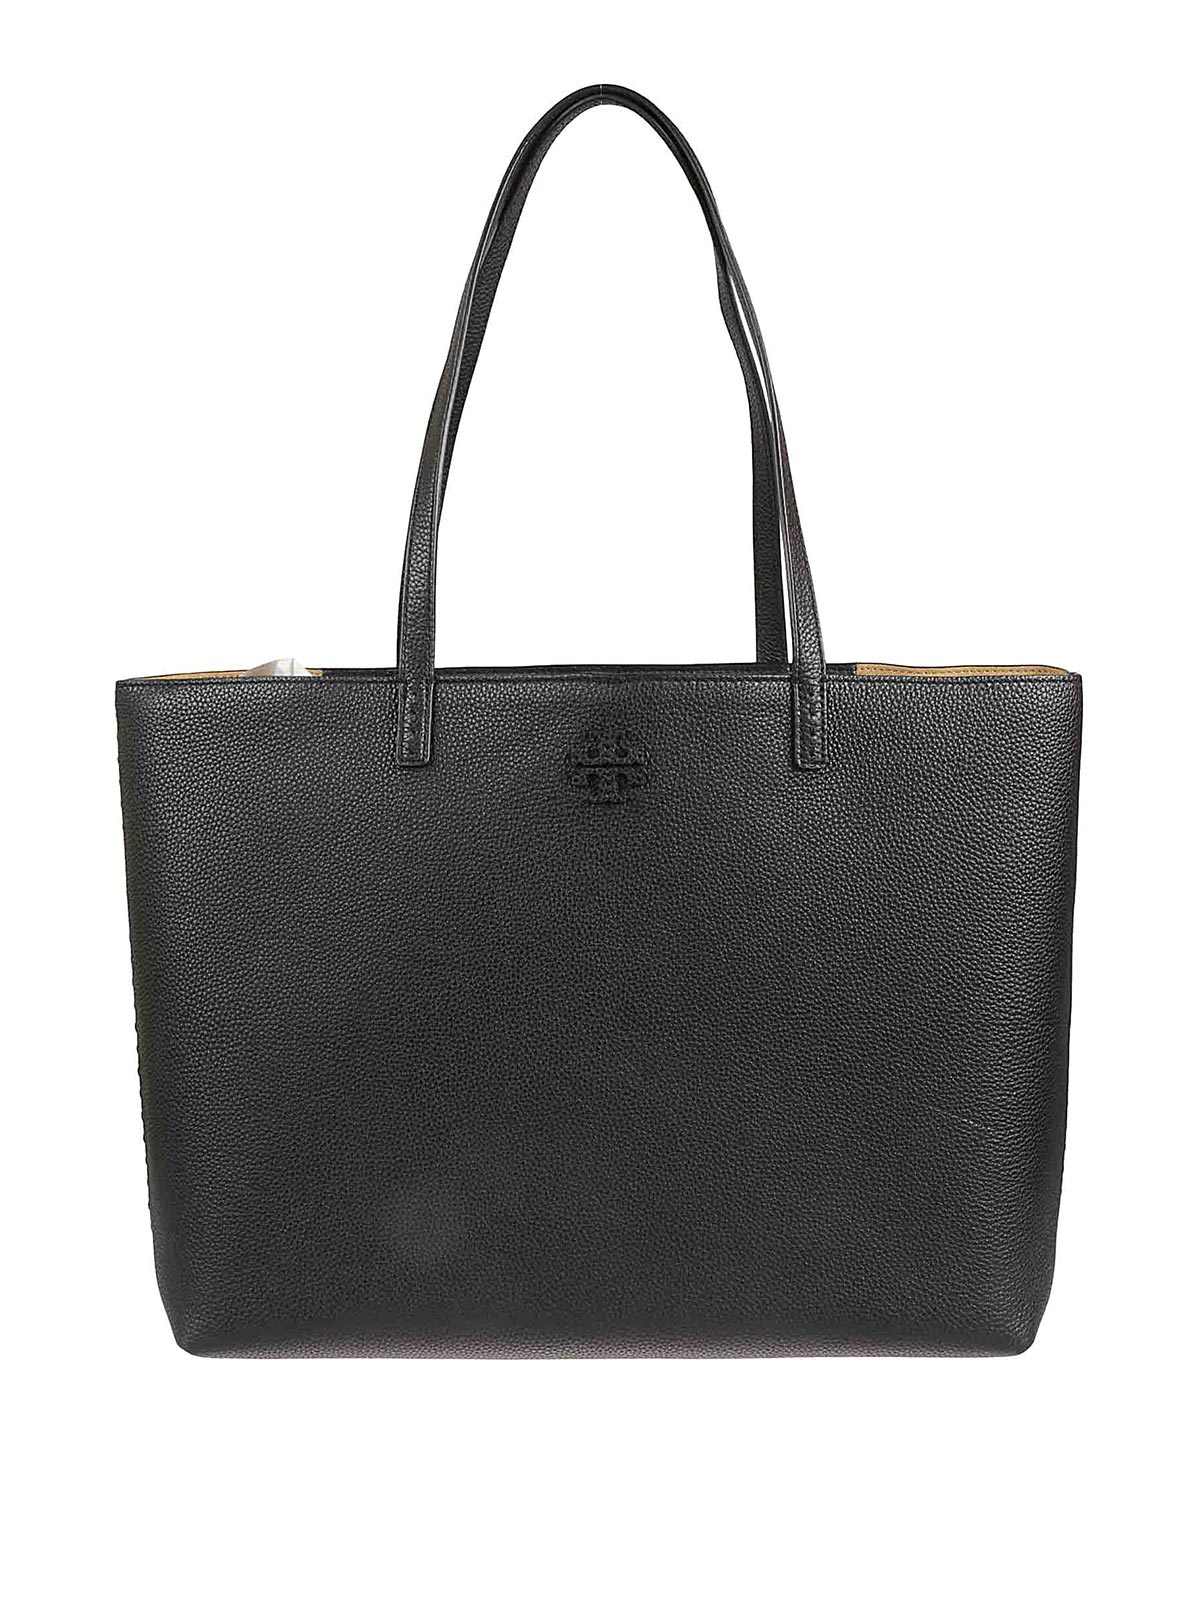 Tory Burch Hammered Leather Bag In Black